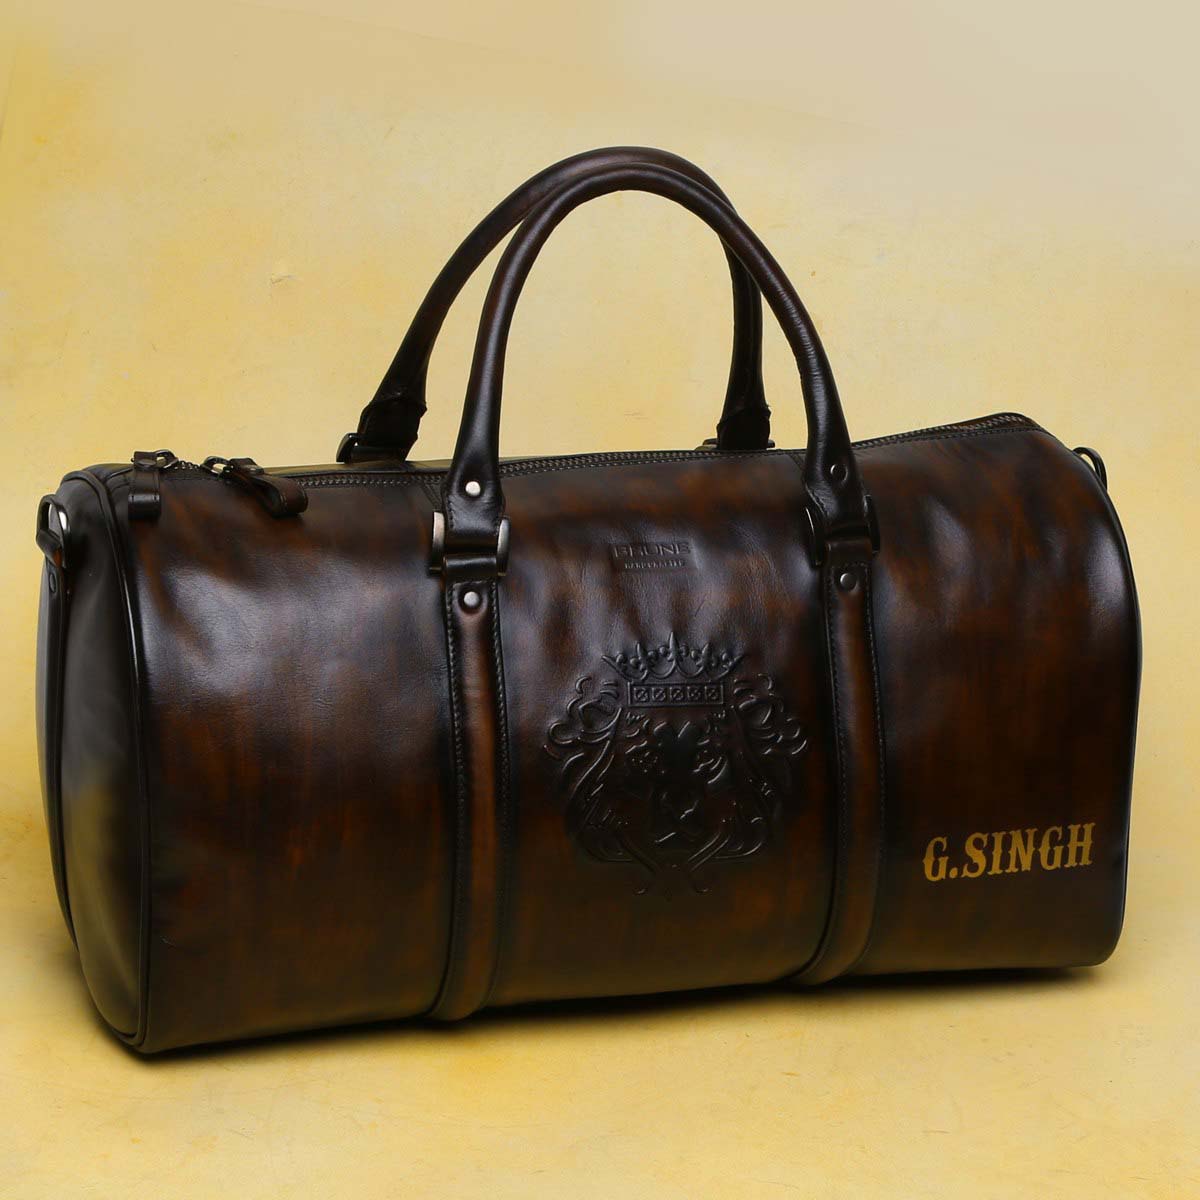 Customized Embossed Lion Logo with G Singh Initial on Brown Duffle  Bag by Brune & Bareskin